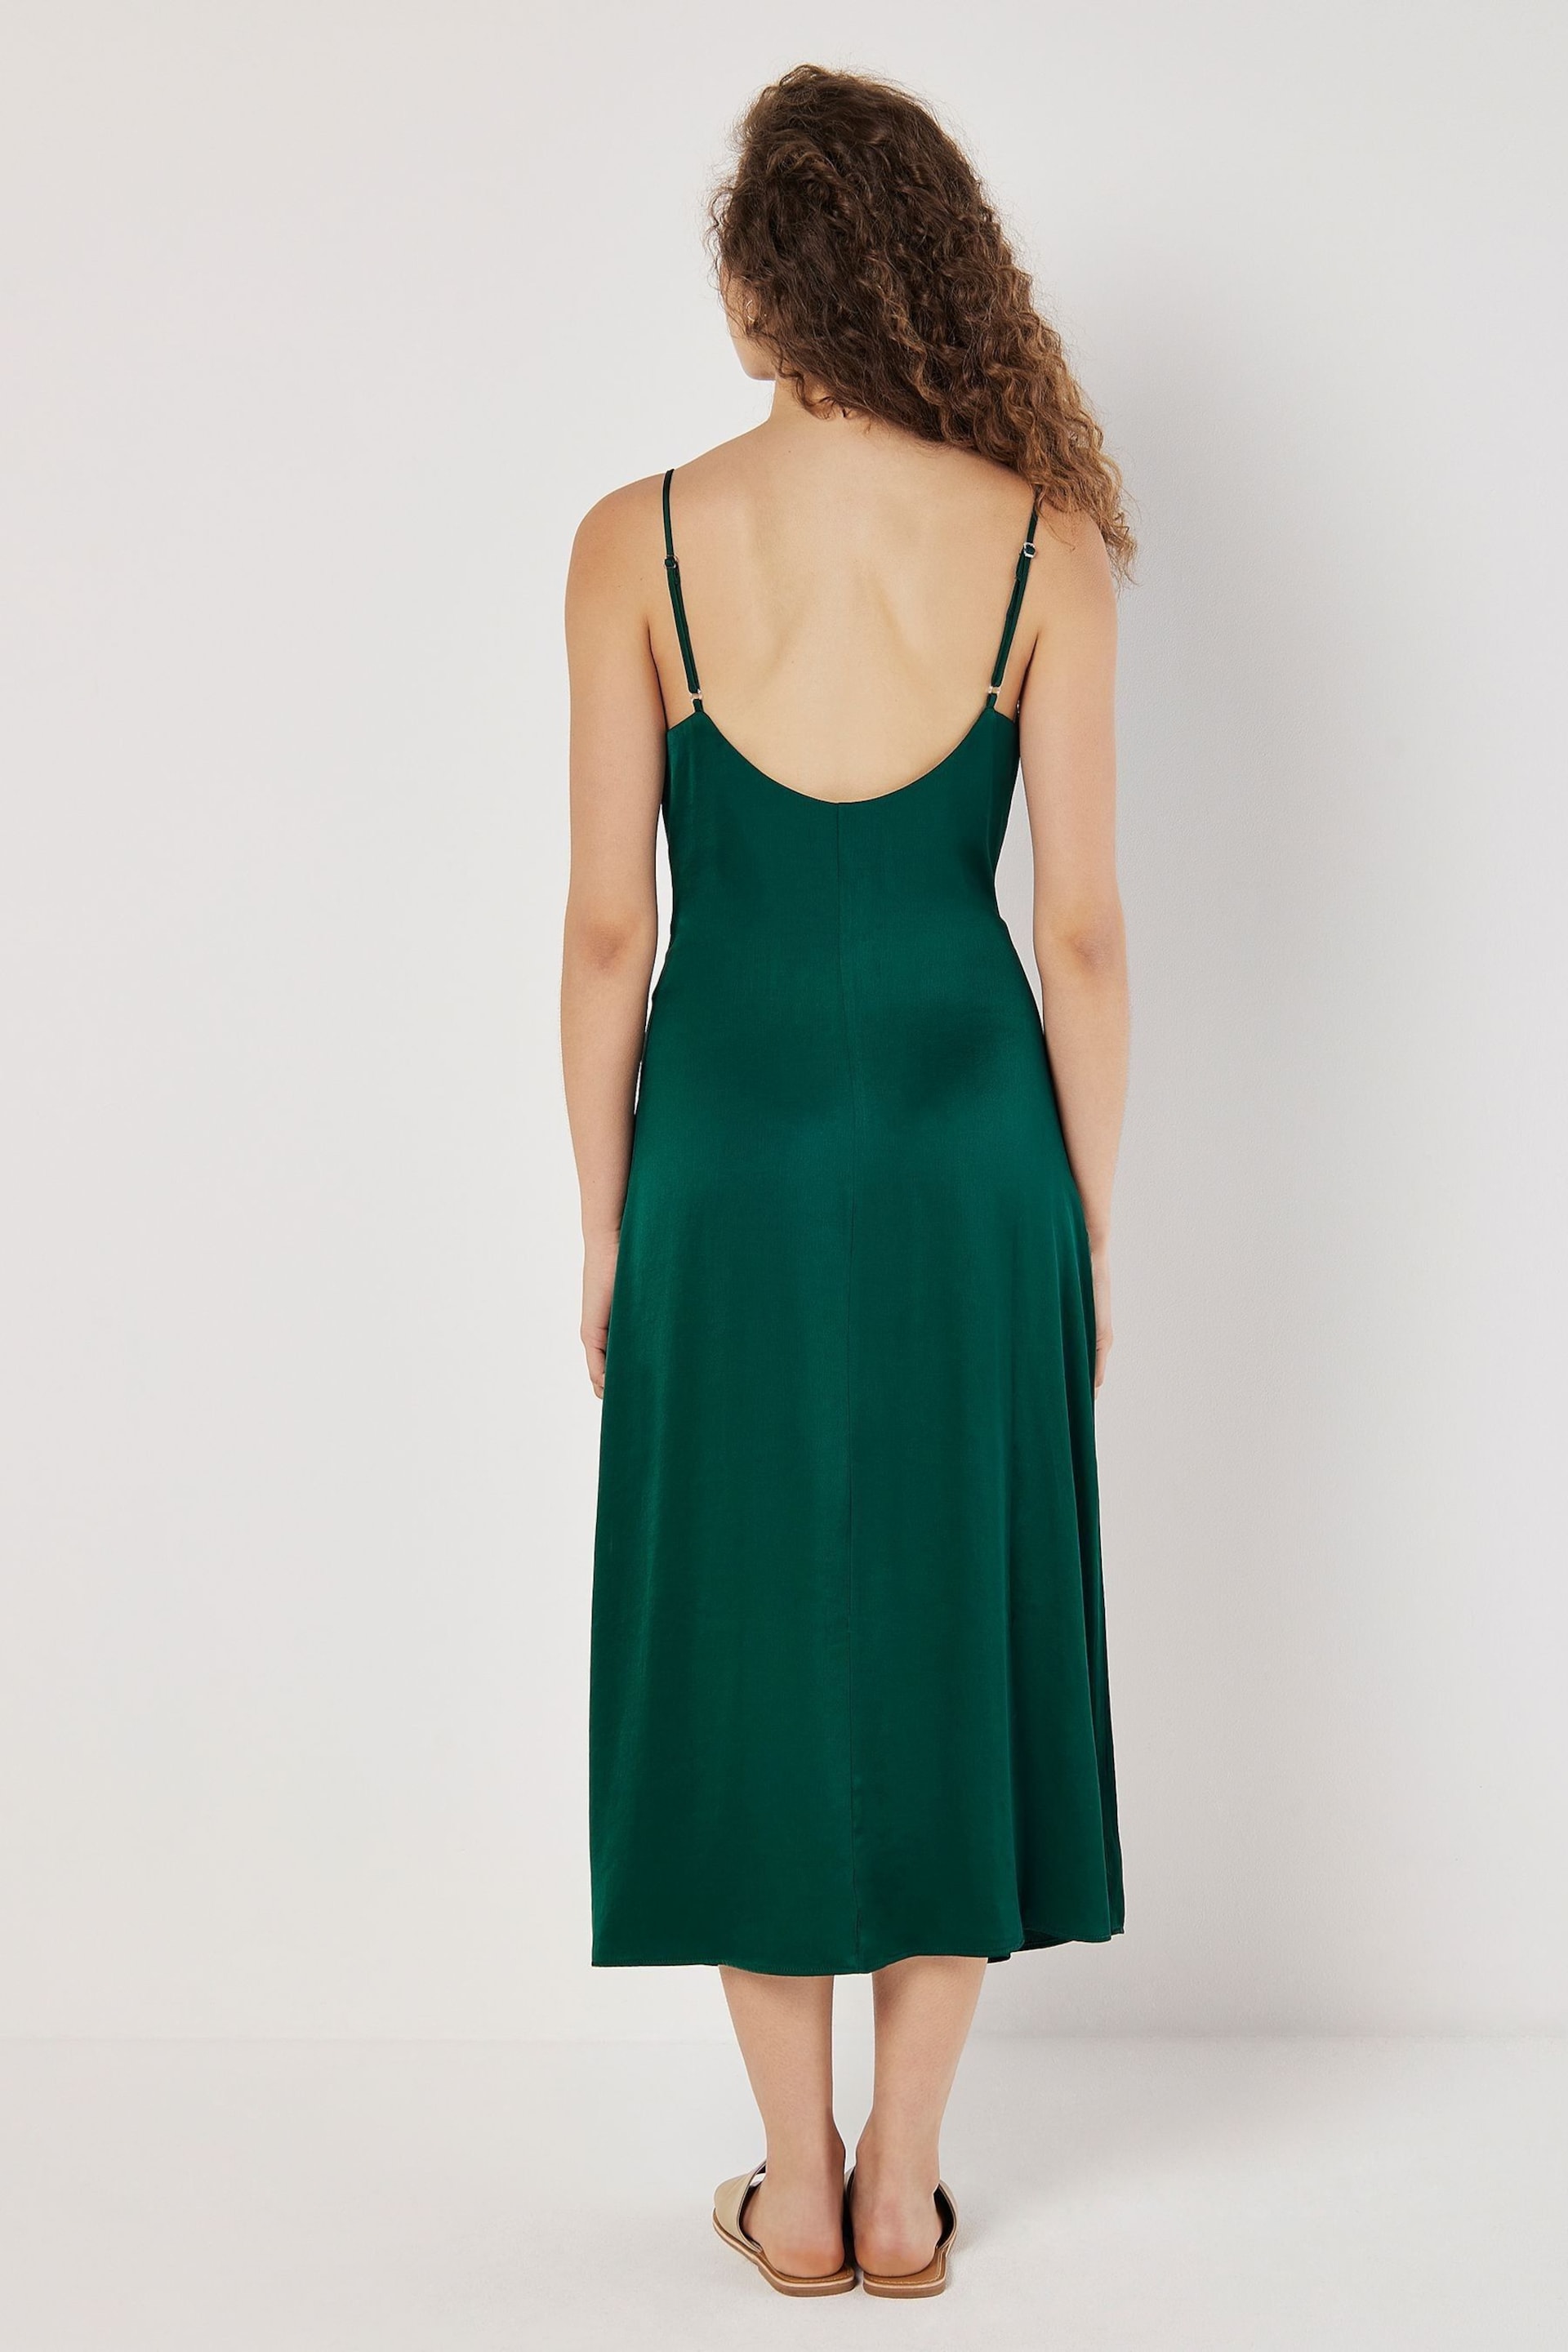 Apricot Green Satin Ruched A Line Midi Dress - Image 4 of 4